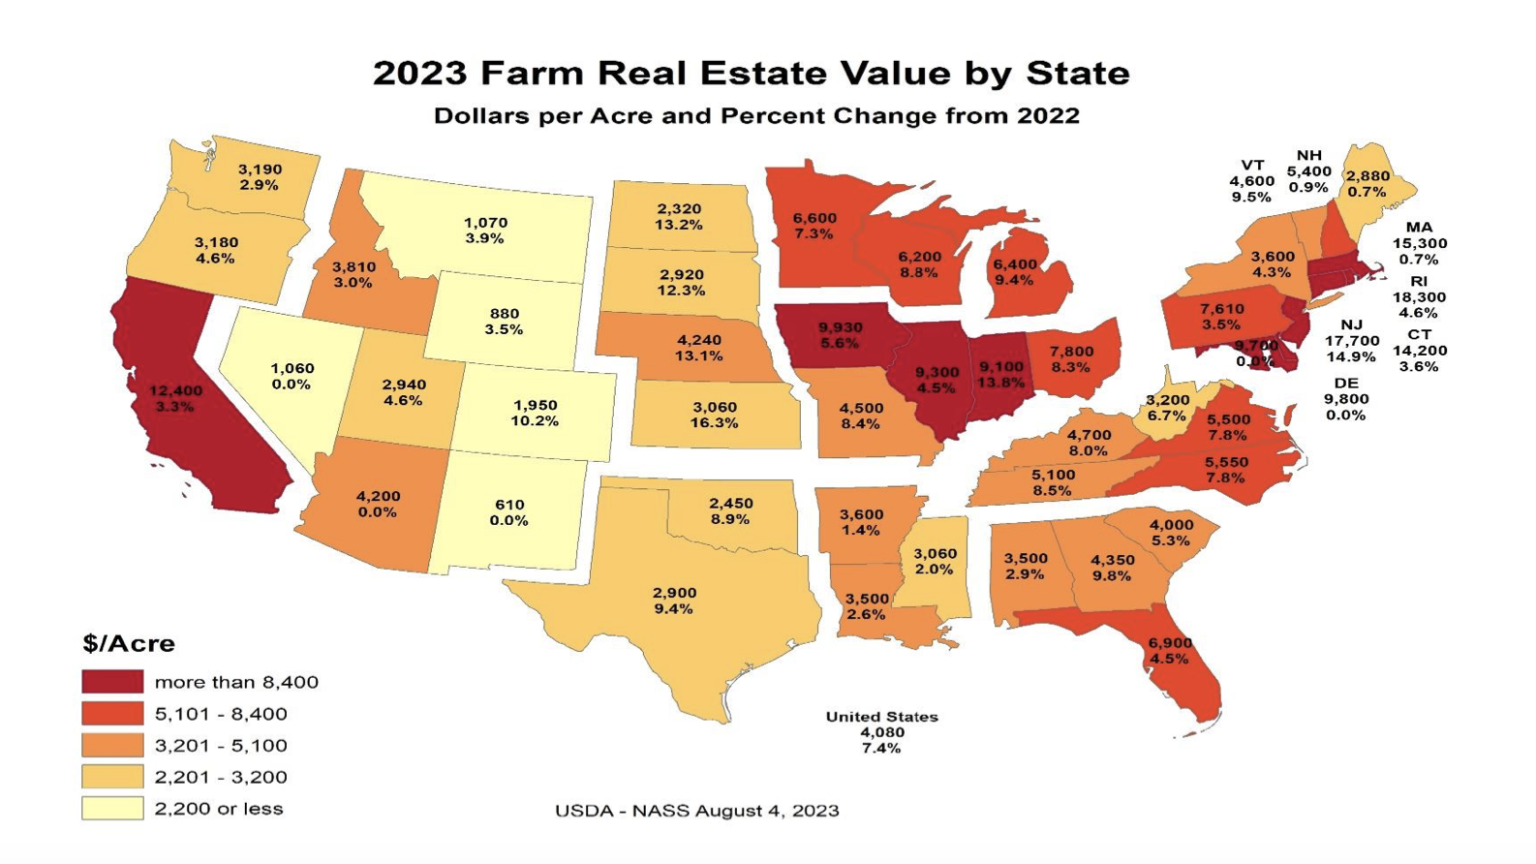 2023 Farm Real Estate Value by State